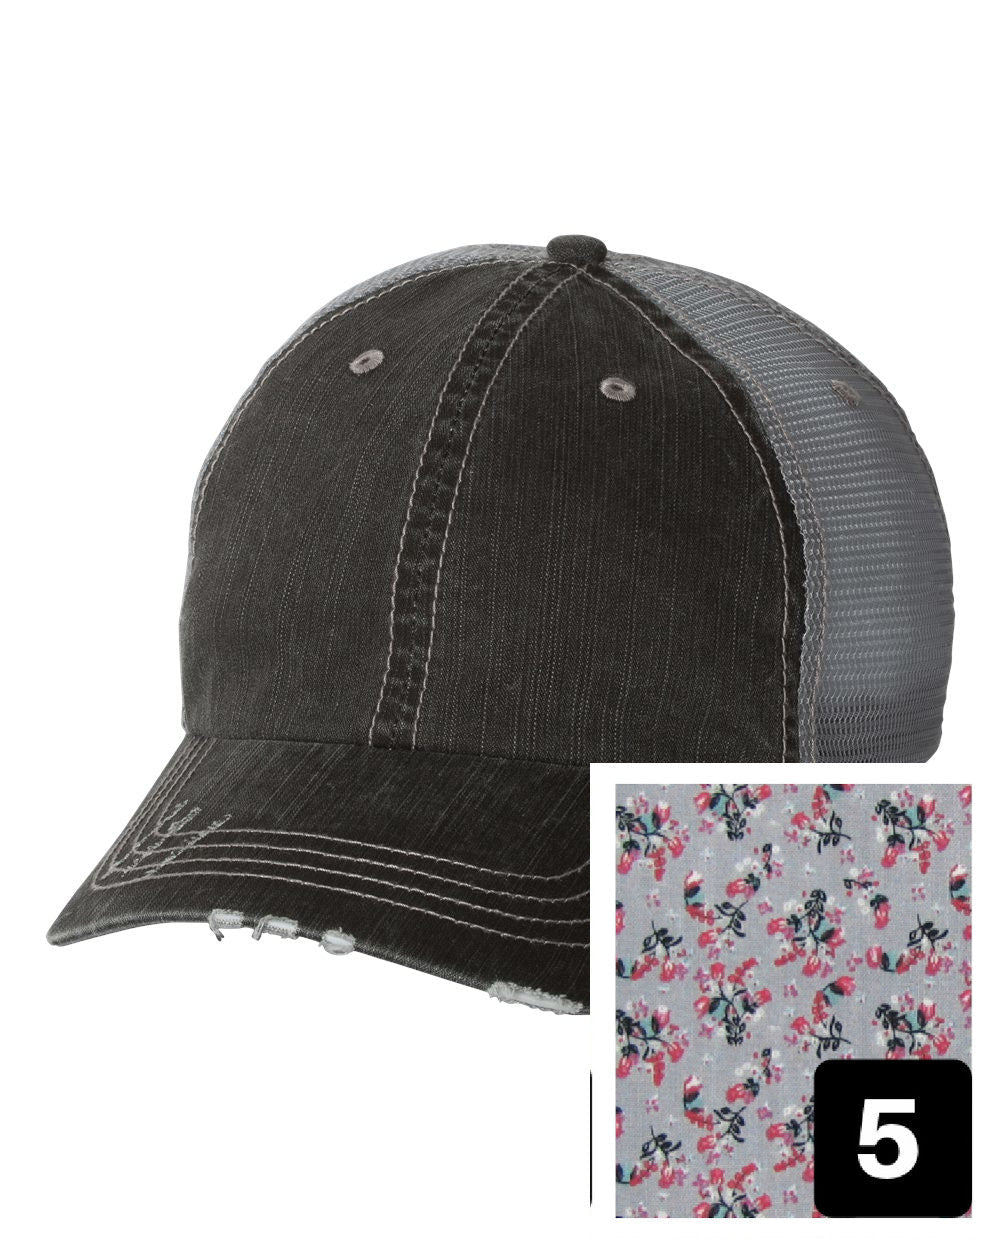 gray distressed trucker hat with purple and pink floral fabric state of Kentucky